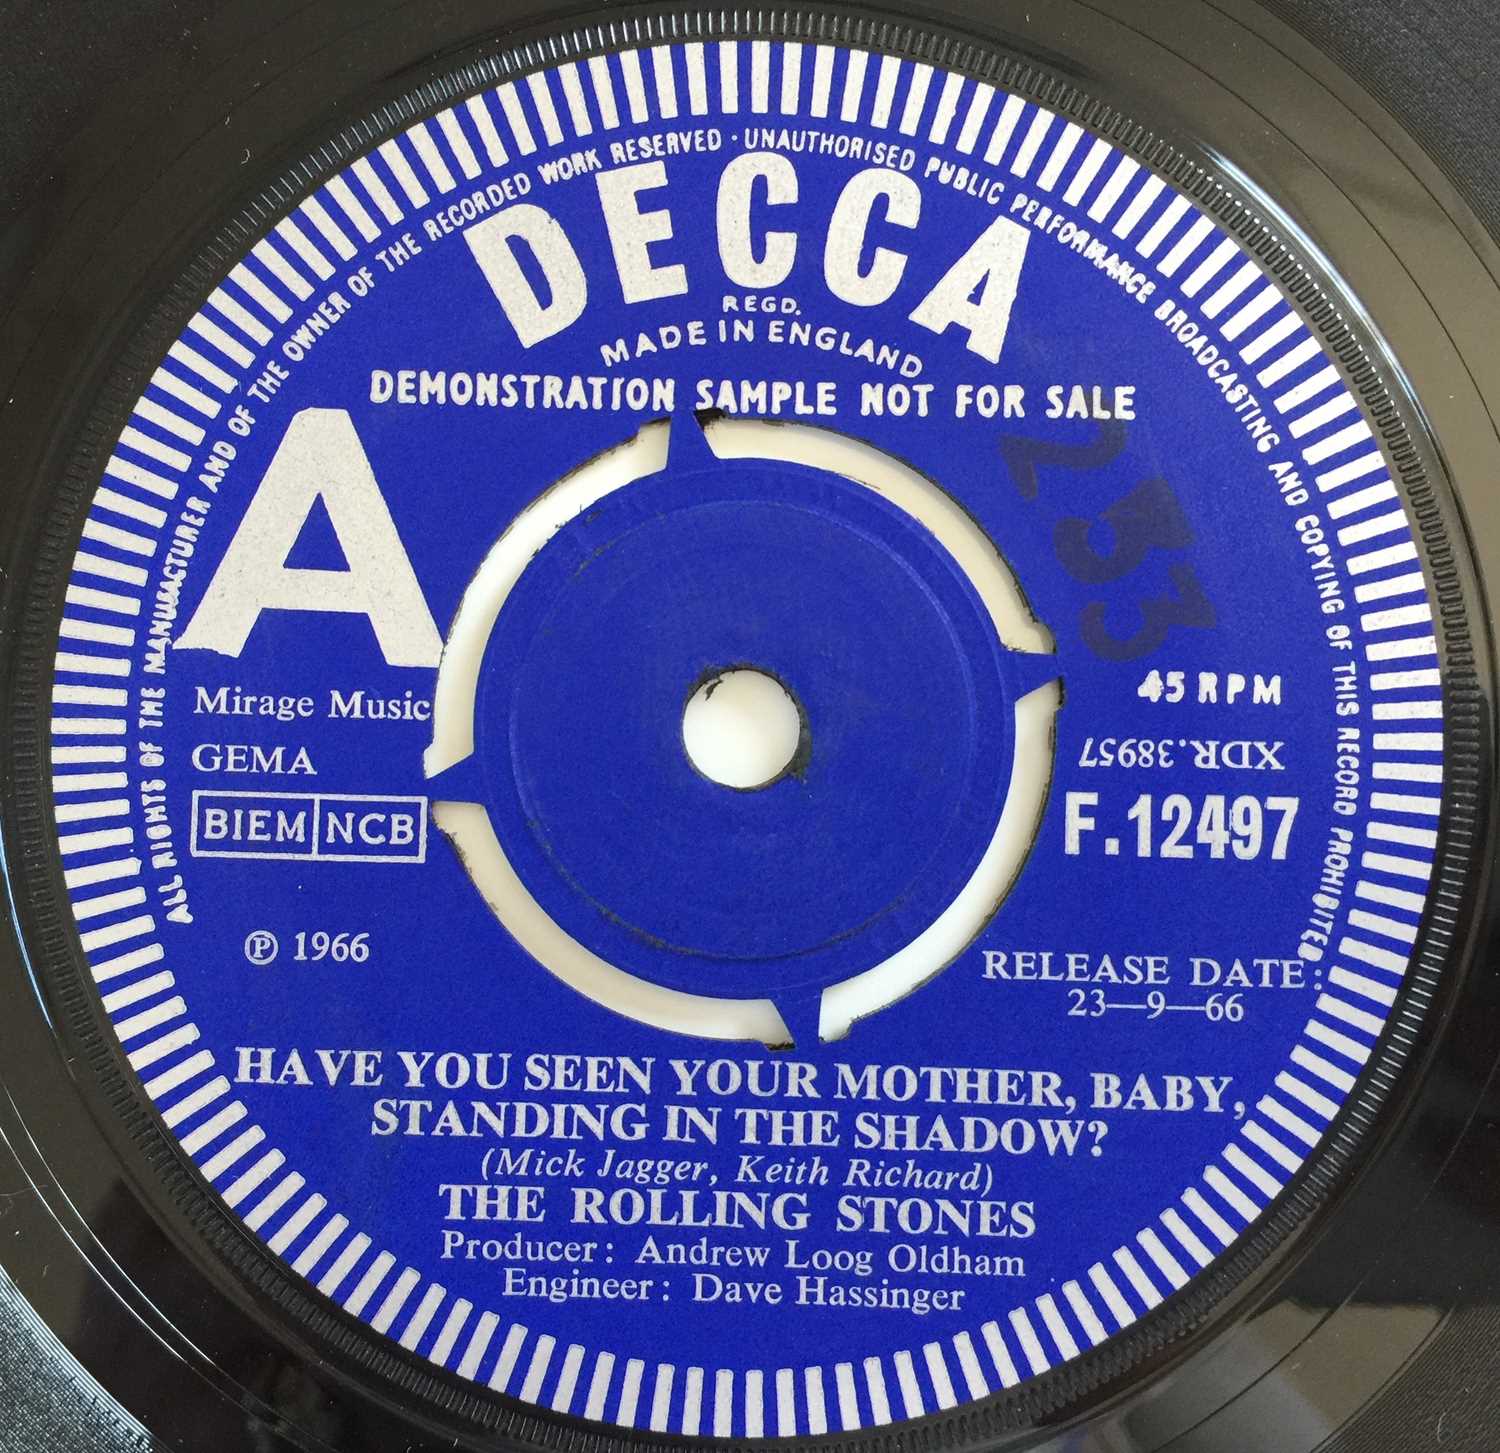 Lot 63 - THE ROLLING STONES - HAVE YOU SEEN YOUR MOTHER, BABY, STANDING IN THE SHADOW? 7" (ORIGINAL UK DEMO - DECCA F 12497)